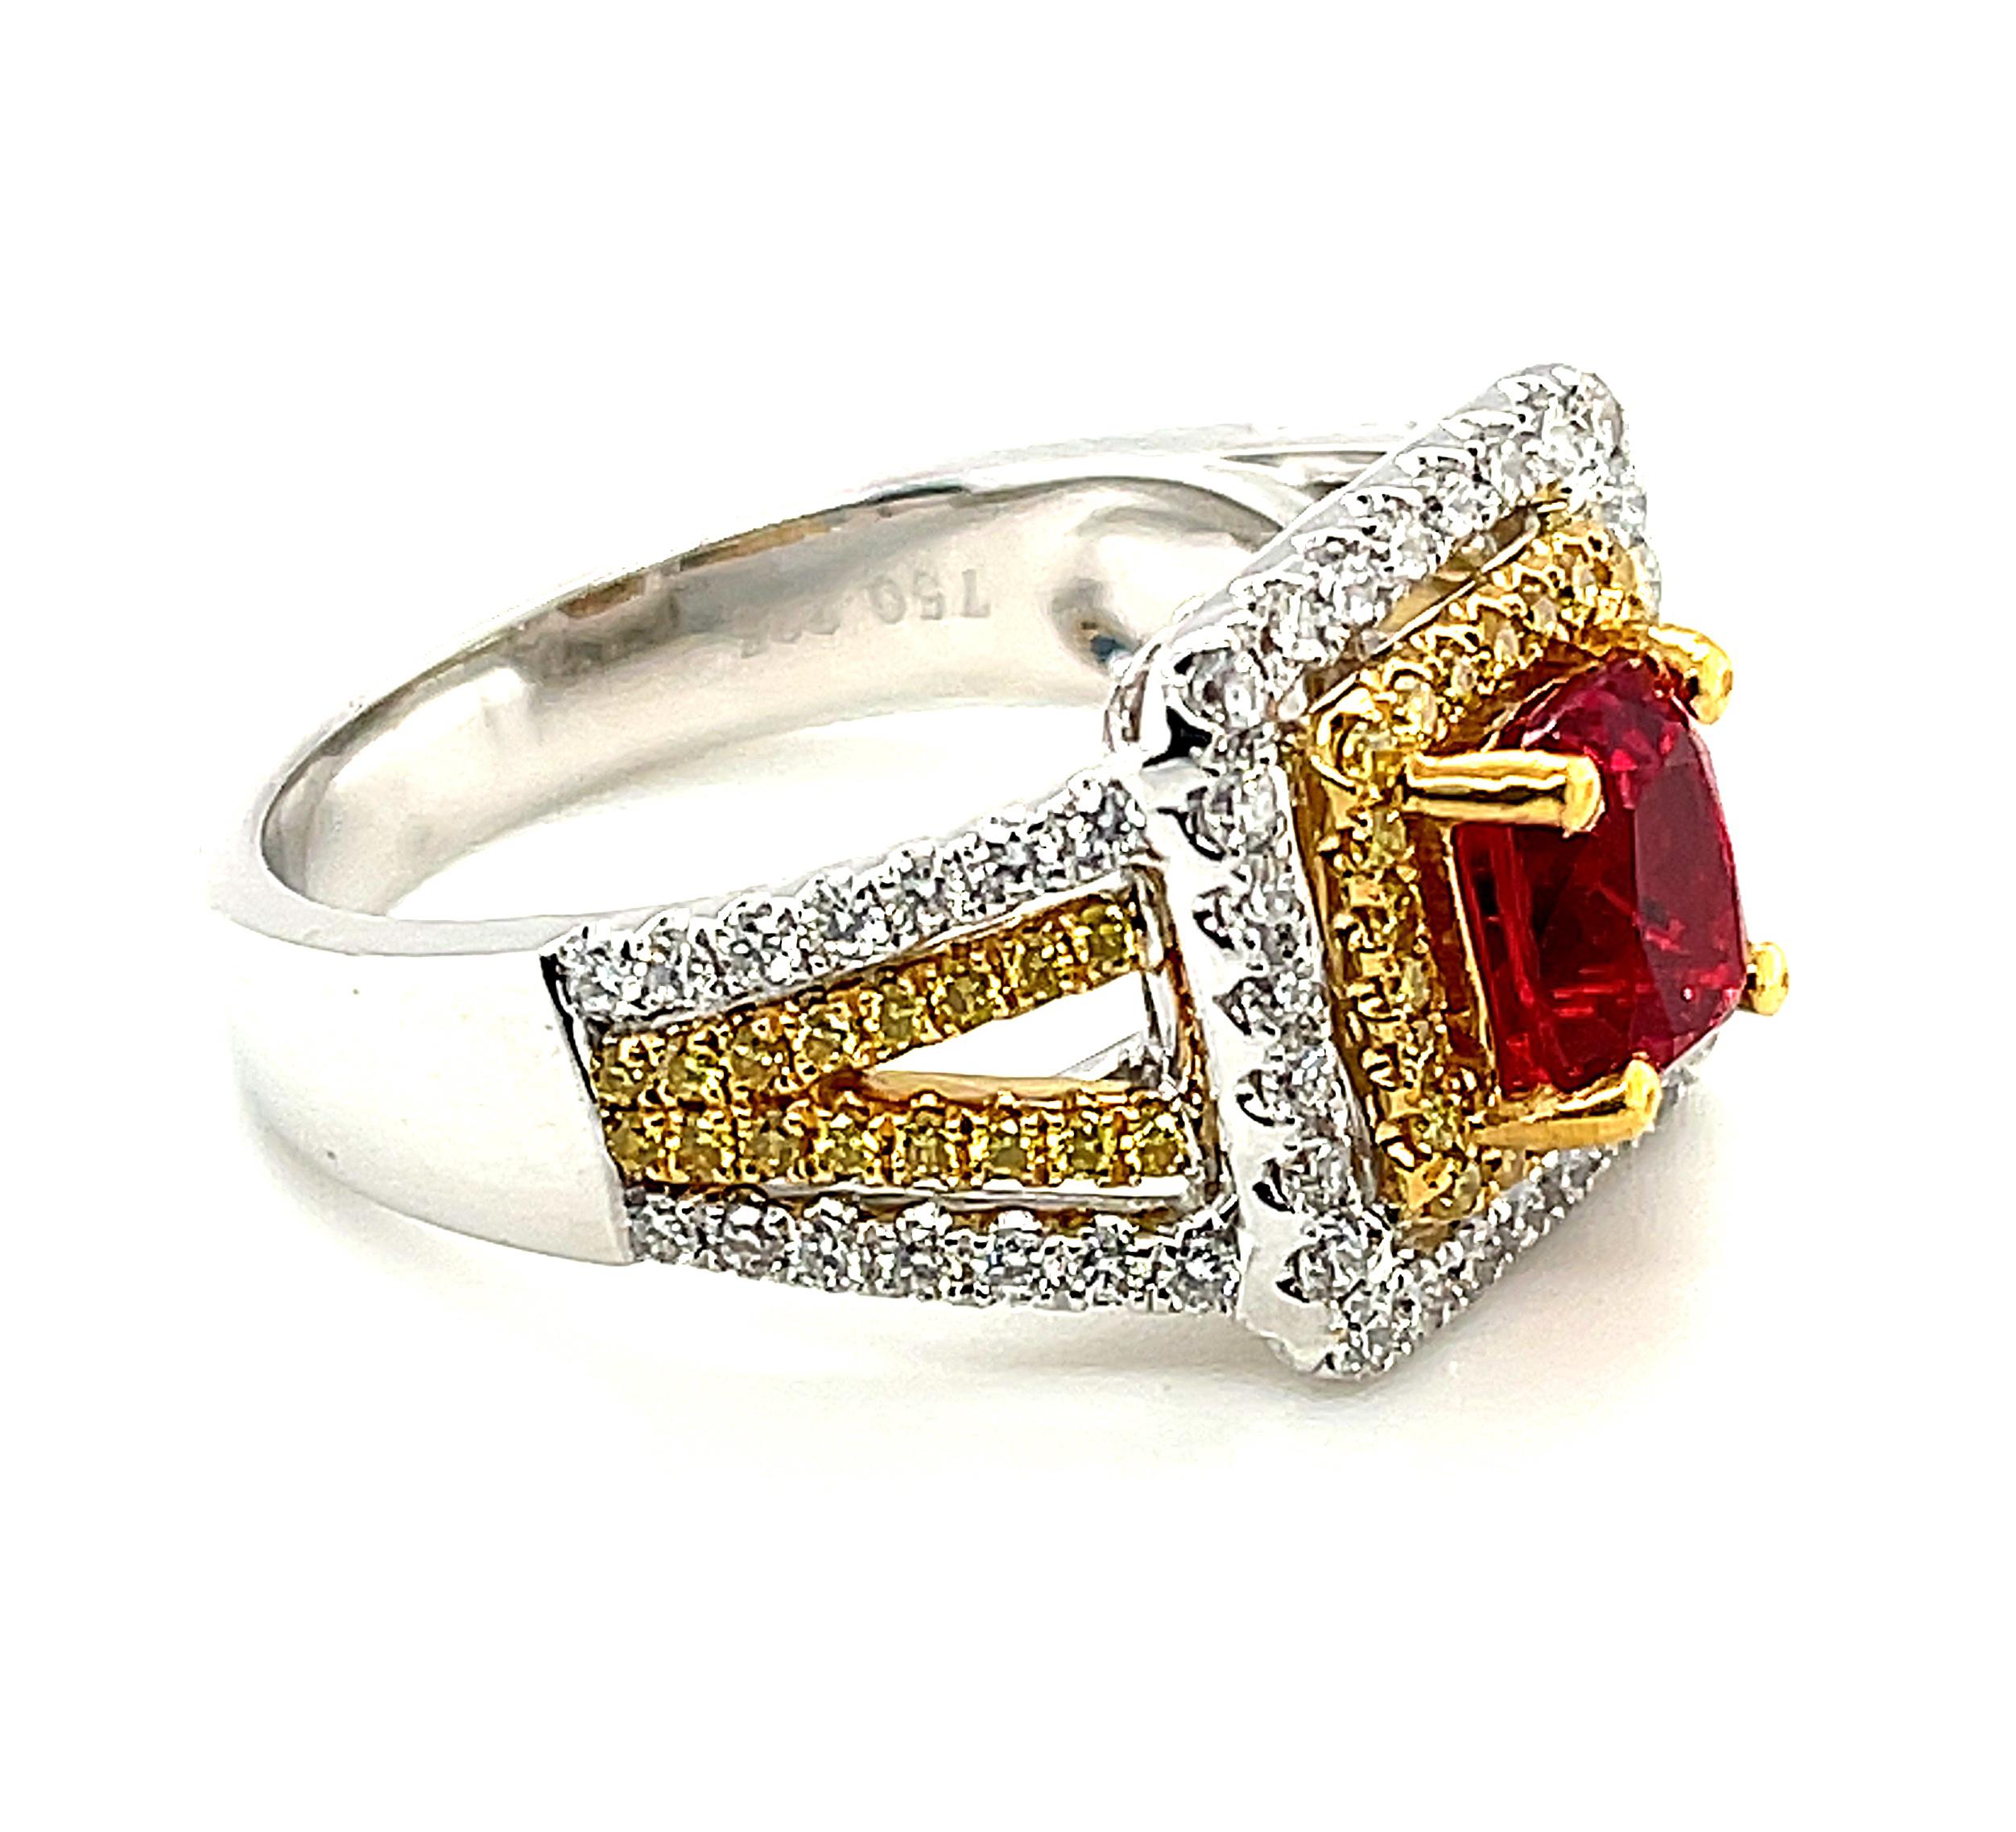 1.23 Carat Burmese Red Spinel and Diamond Cocktail Ring in Yellow and White Gold For Sale 5